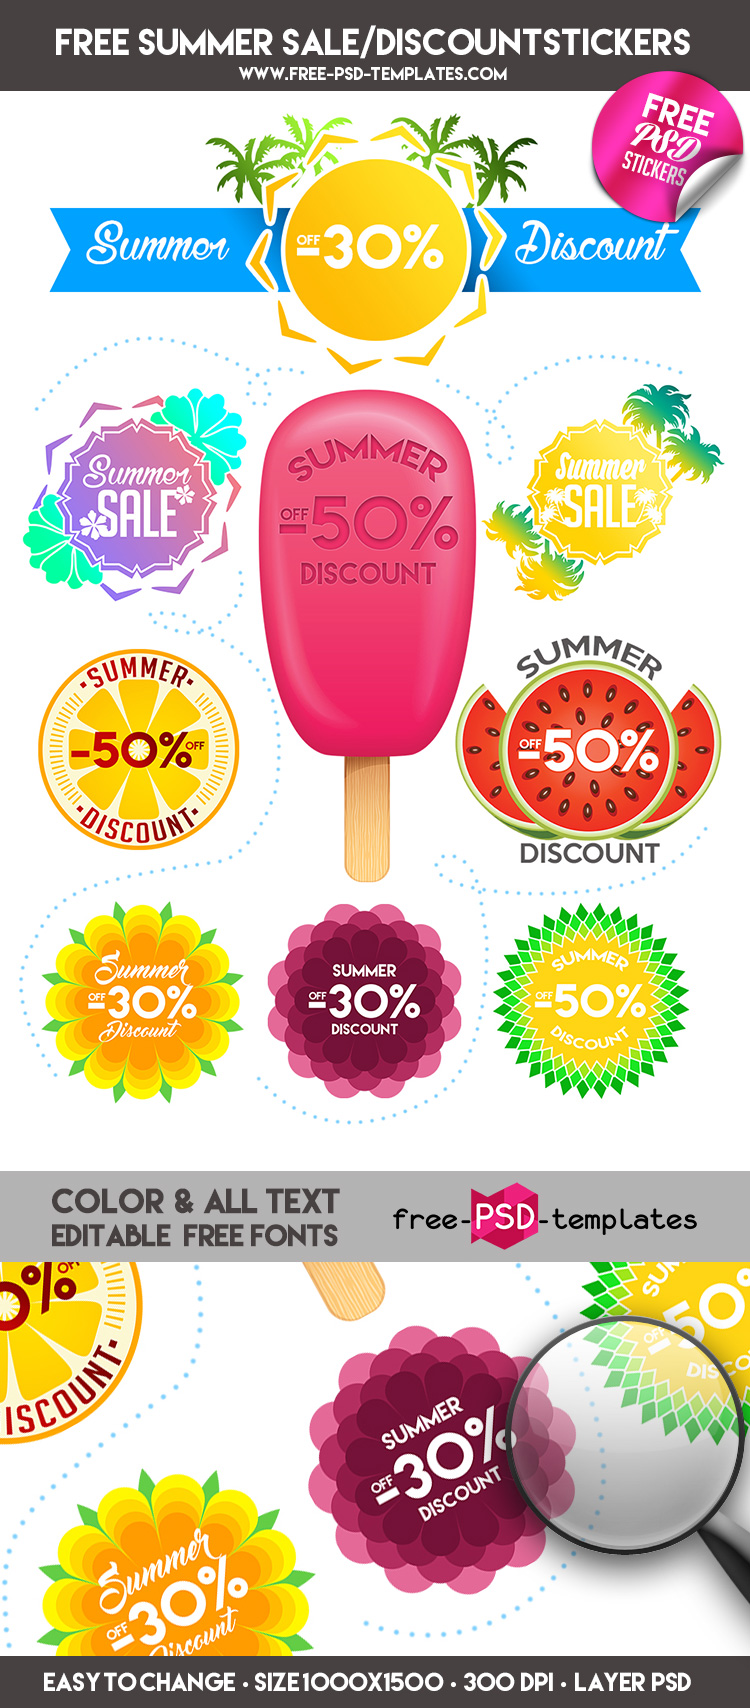 Preview_Free_Summer_Sale_Discount_Stickers